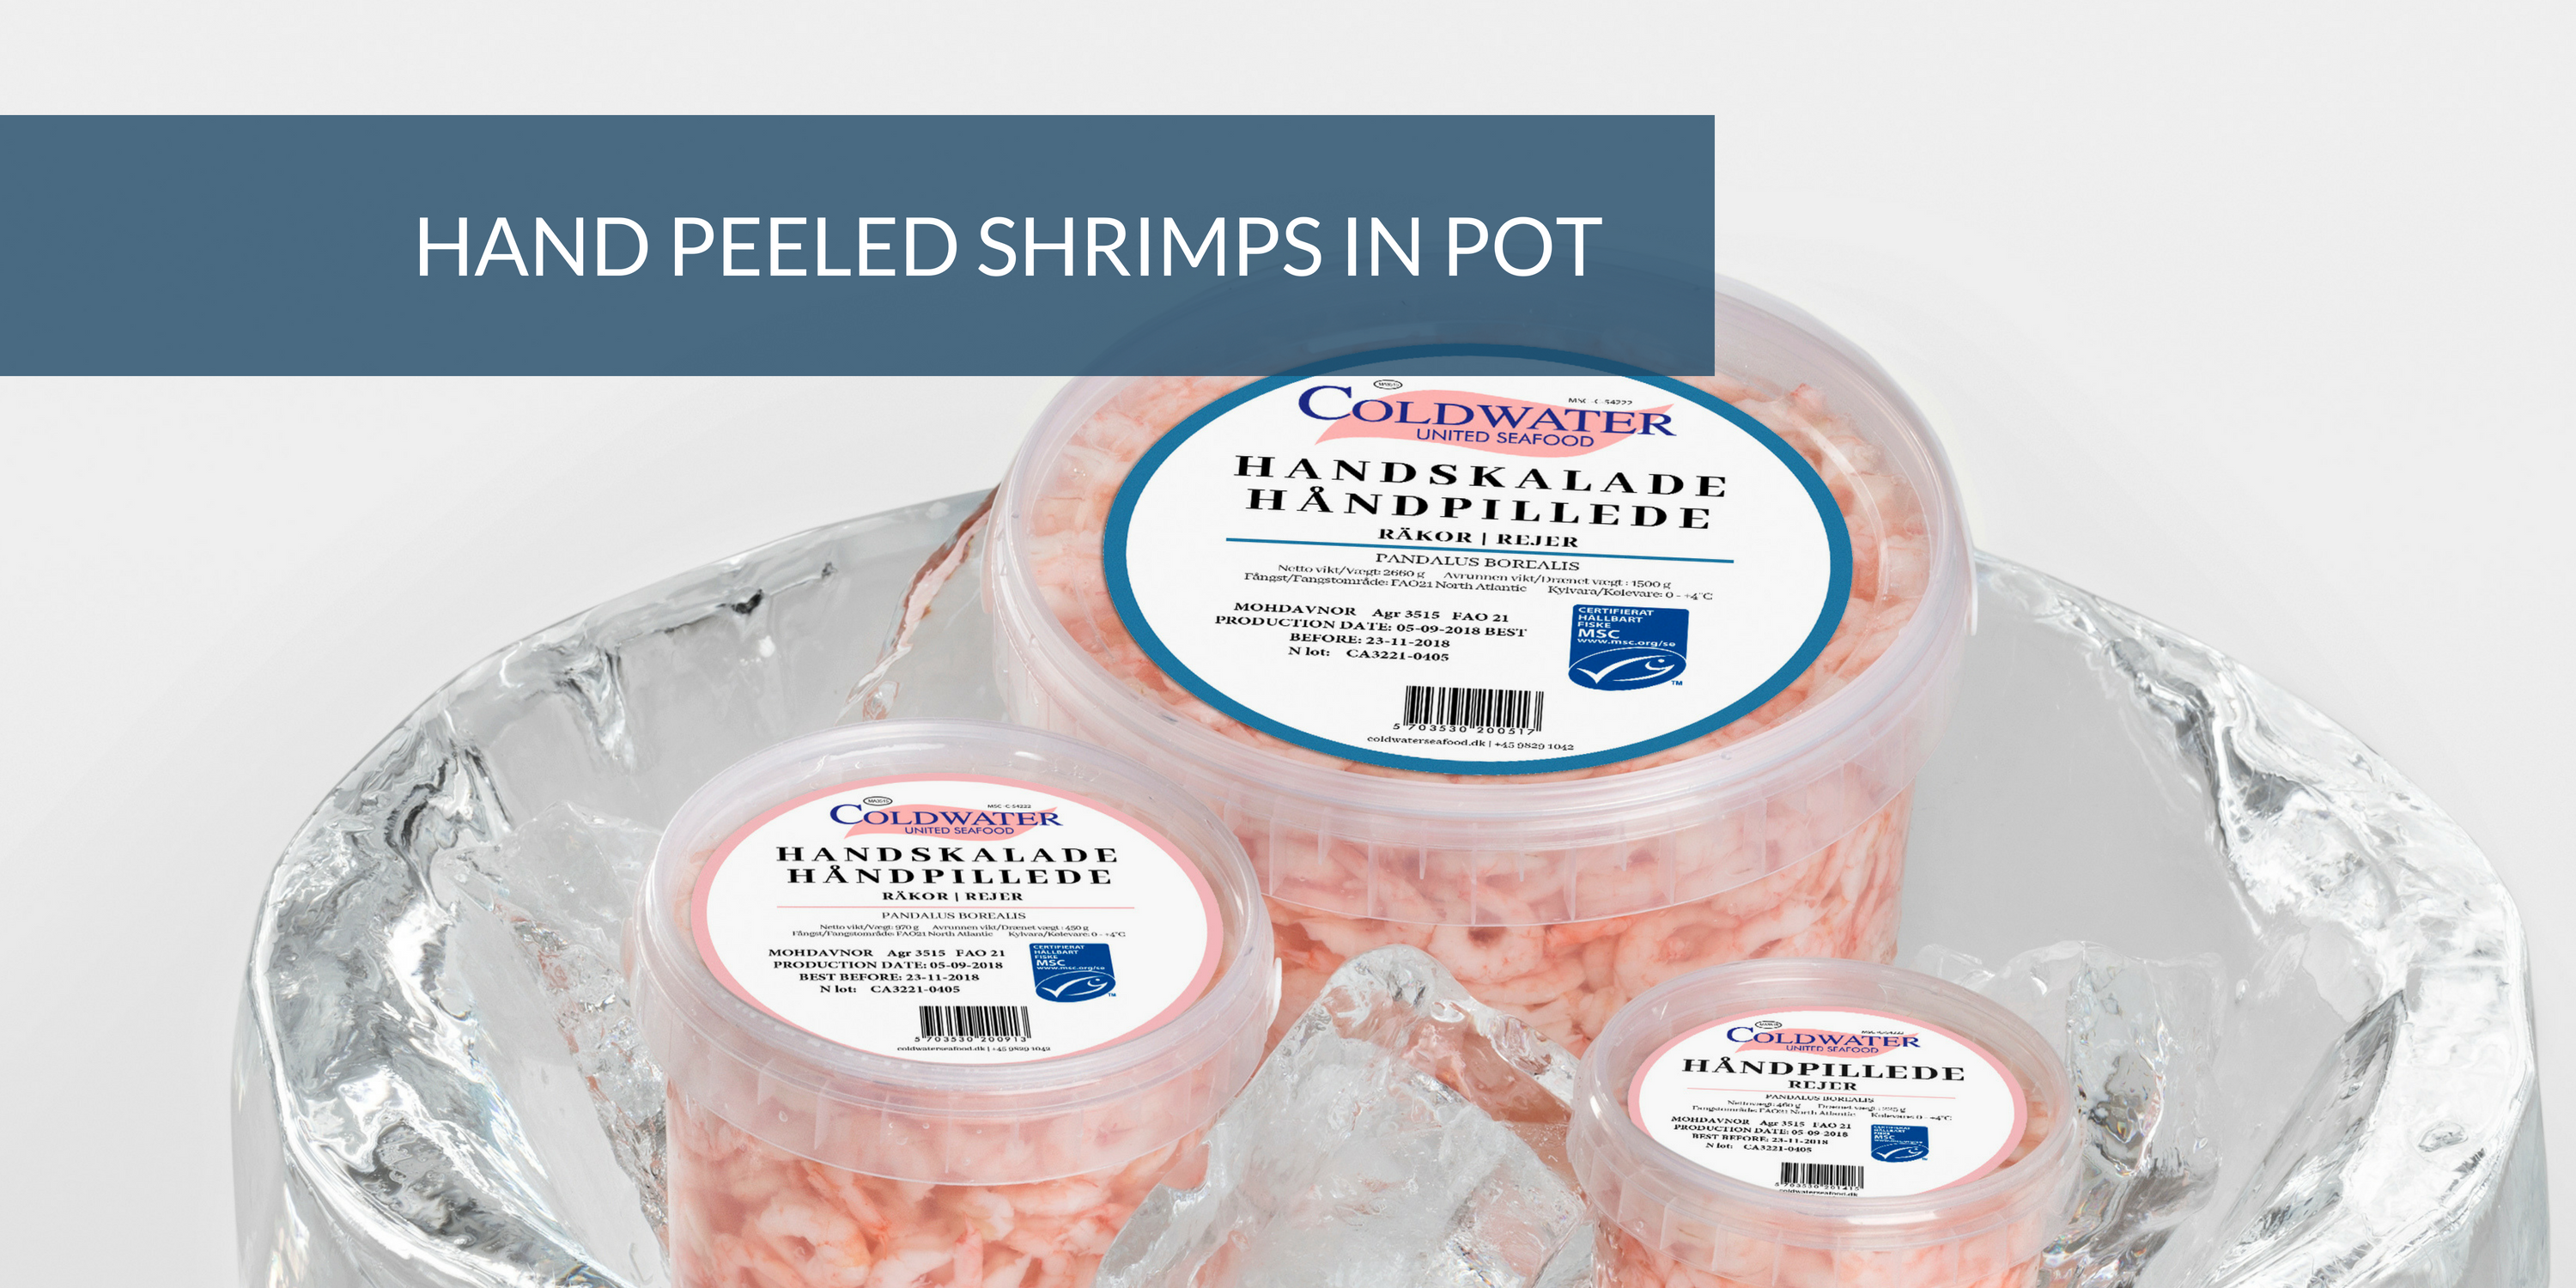 Hand peeled shrimps in pot